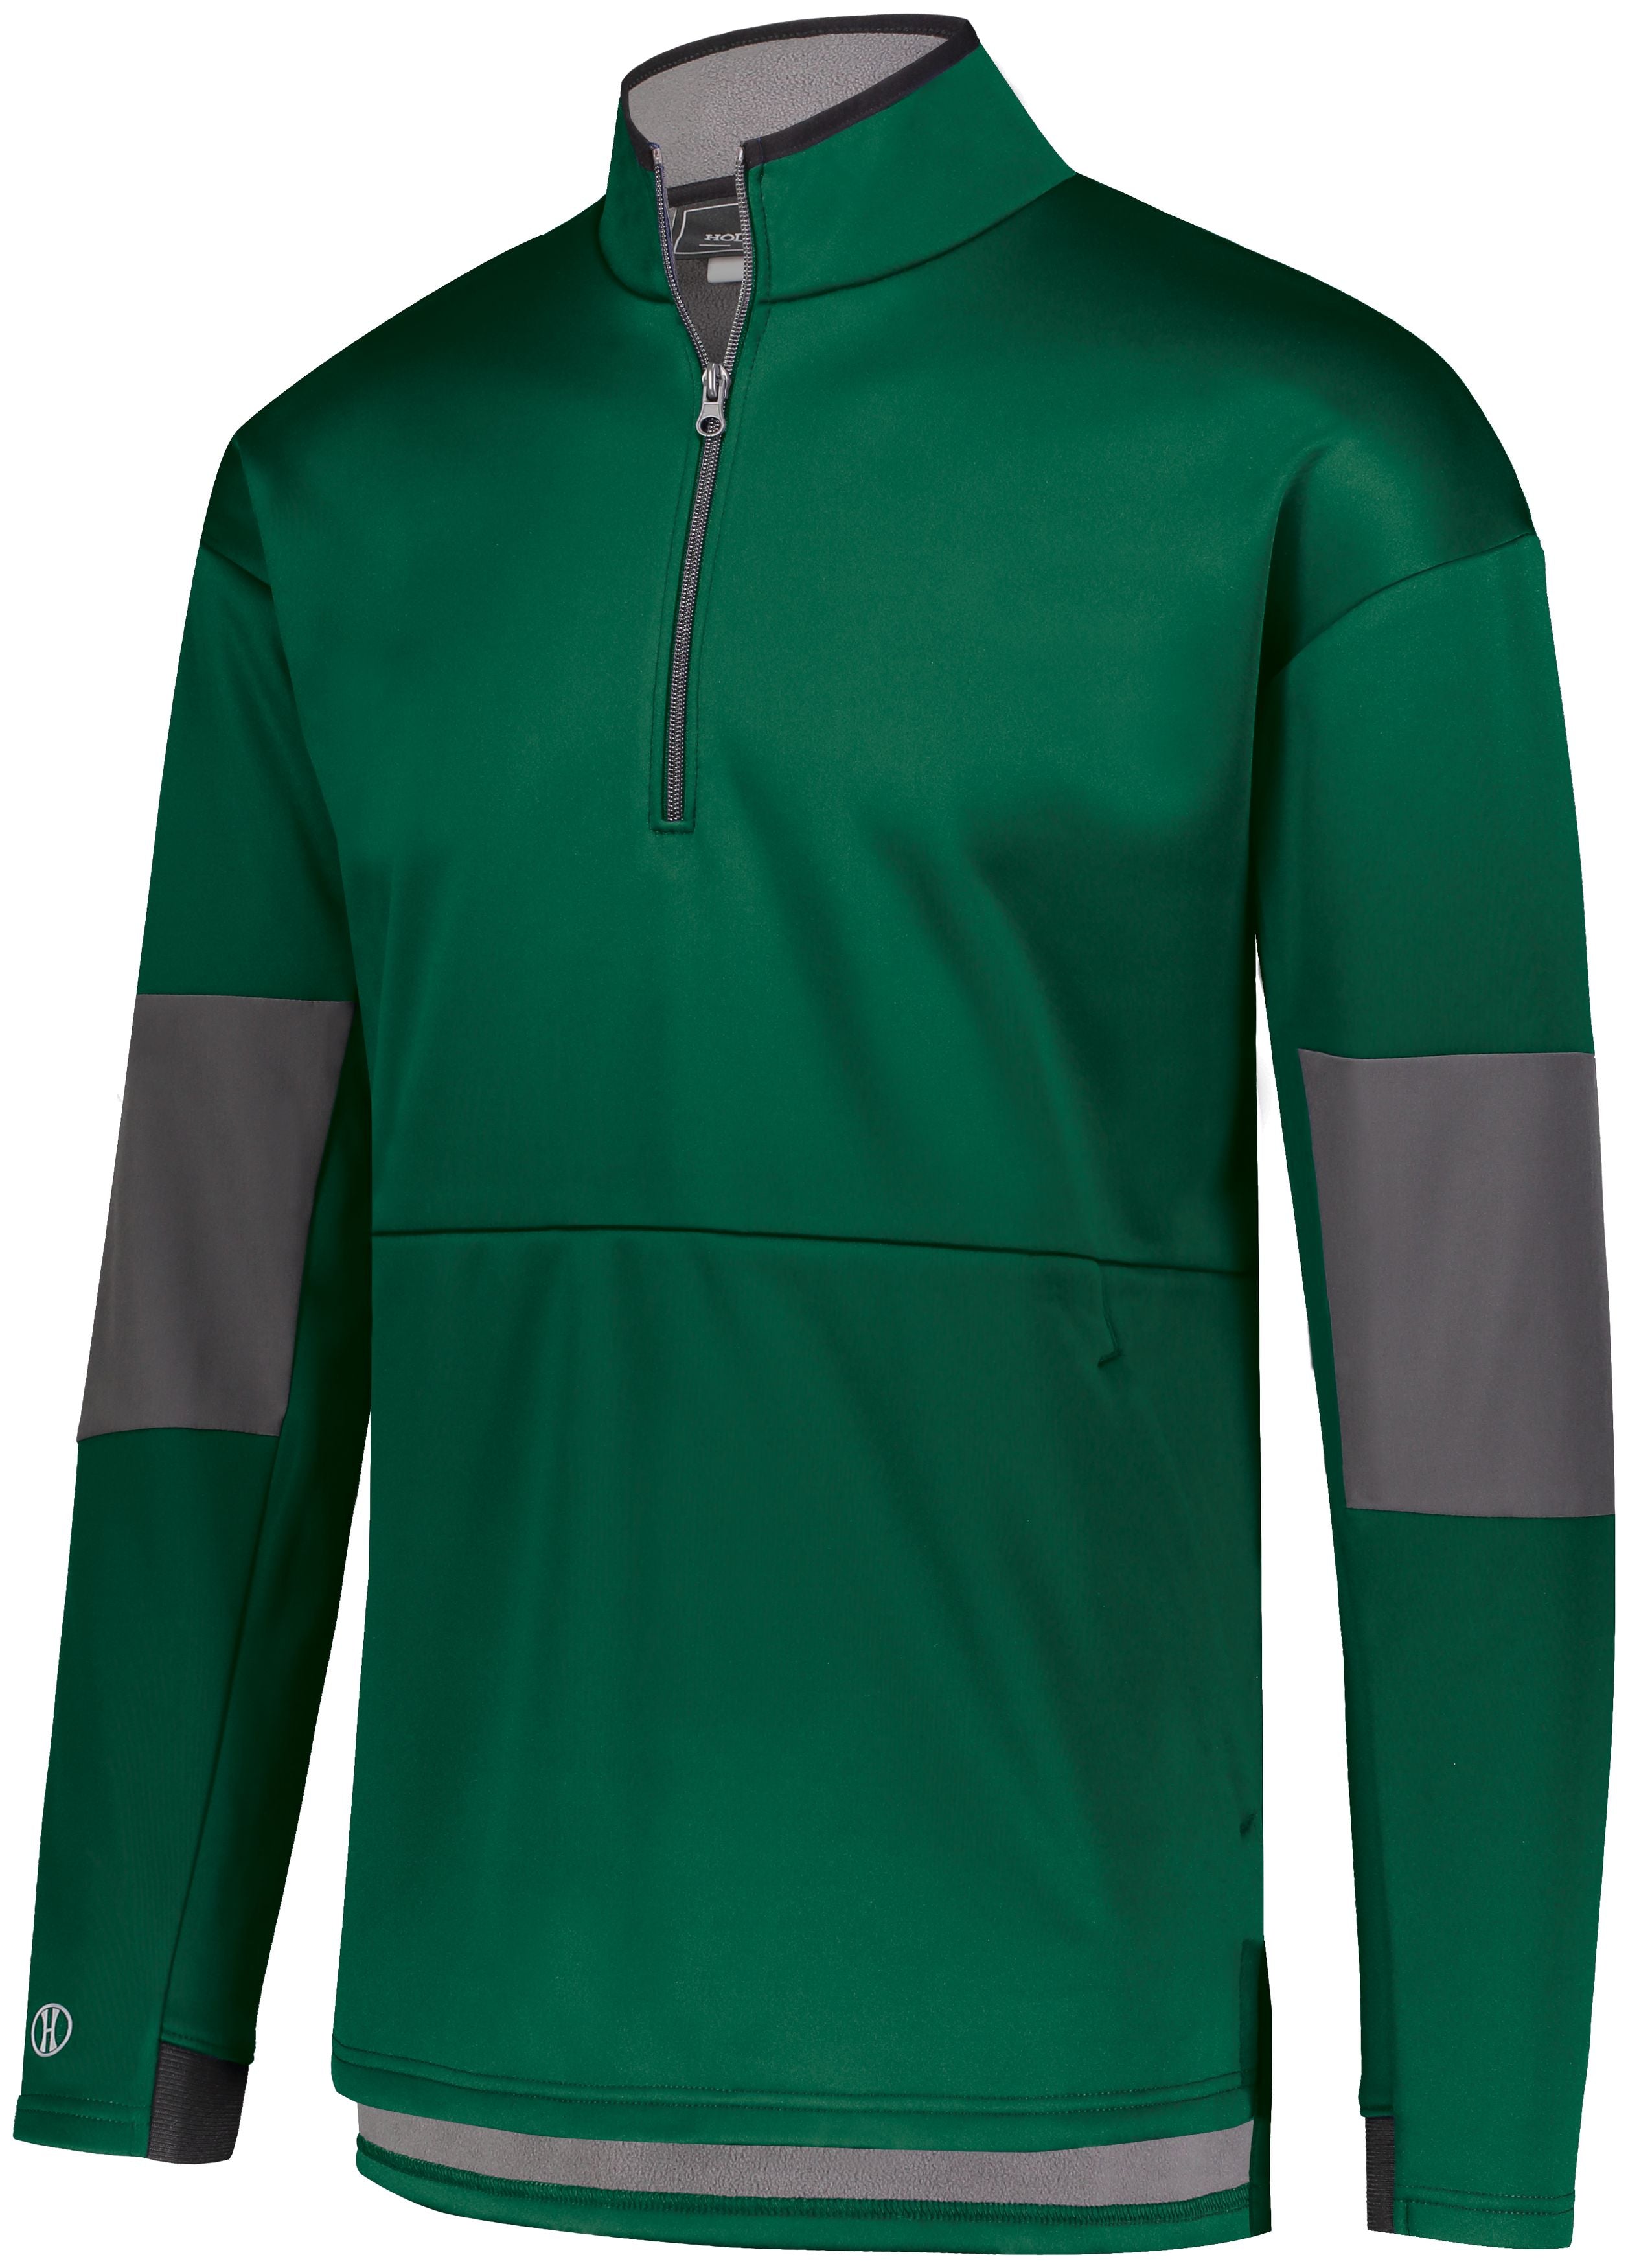 Holloway Sof-Stretch Pullover in Forest/Carbon  -Part of the Adult, Adult-Pullover, Holloway, Outerwear product lines at KanaleyCreations.com